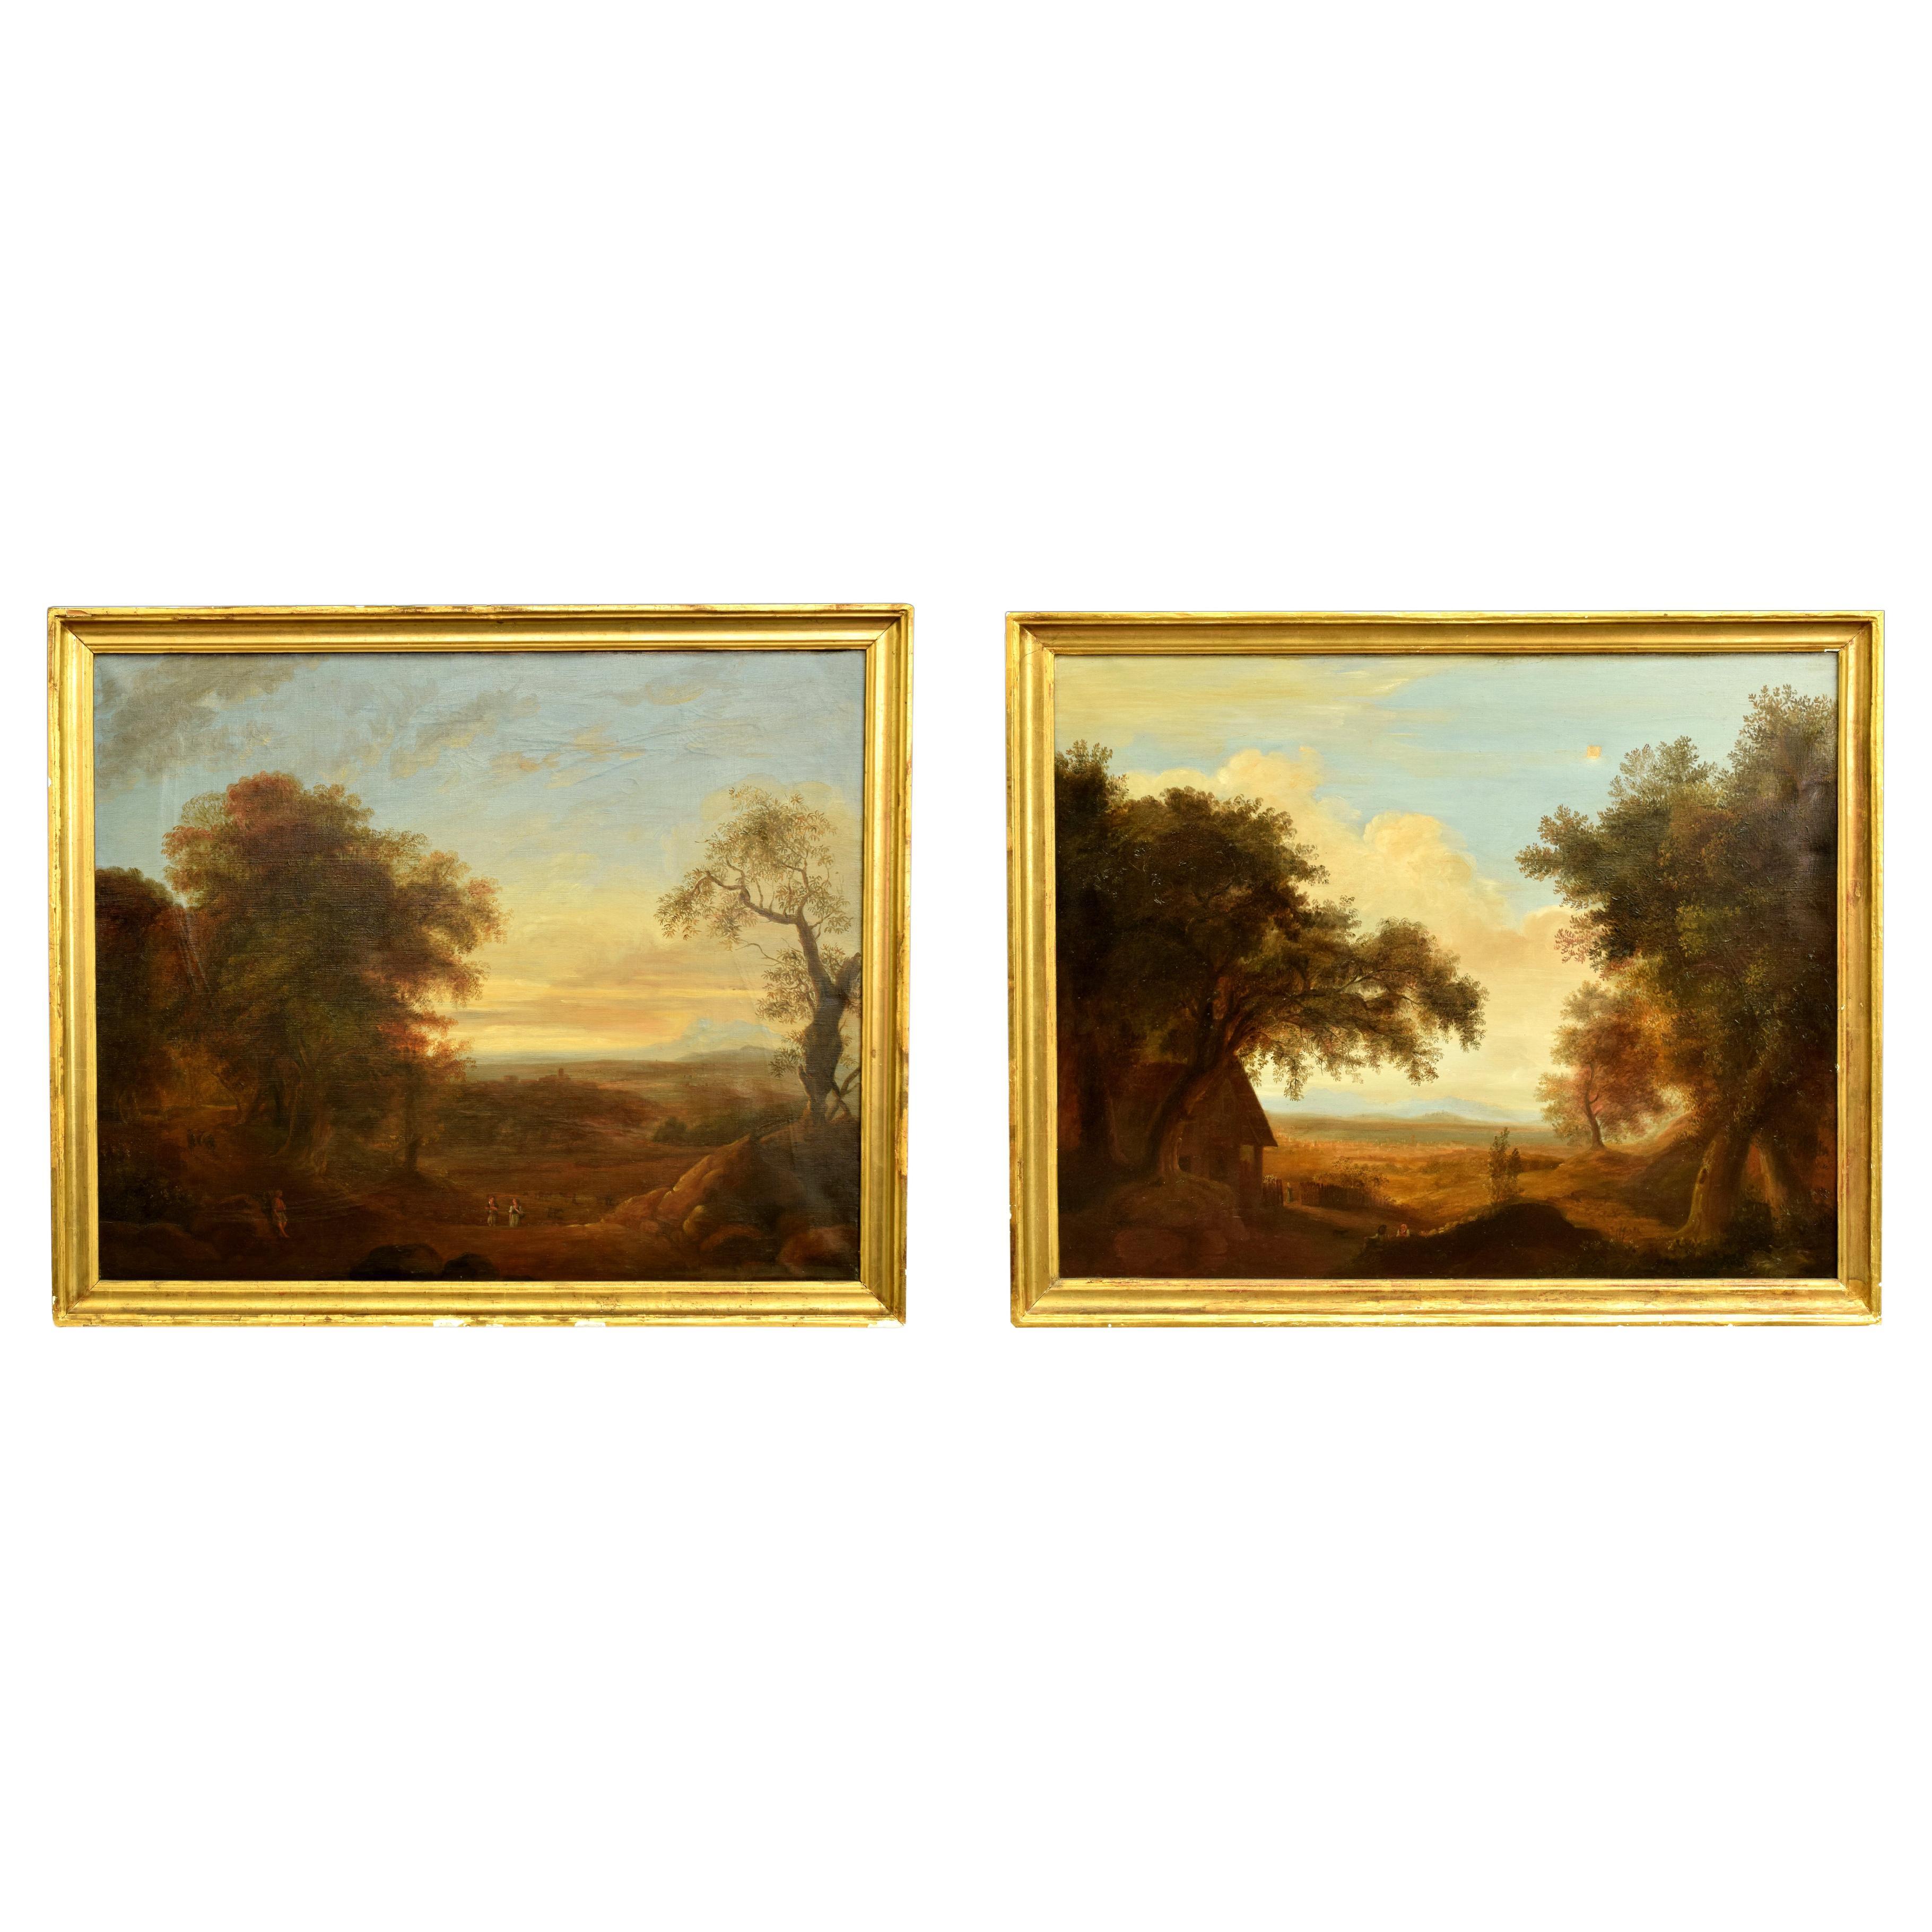 Landscapes, Xalapa, Mexico, Pair of Oils on Canvas, Spanish School, Ca 1840